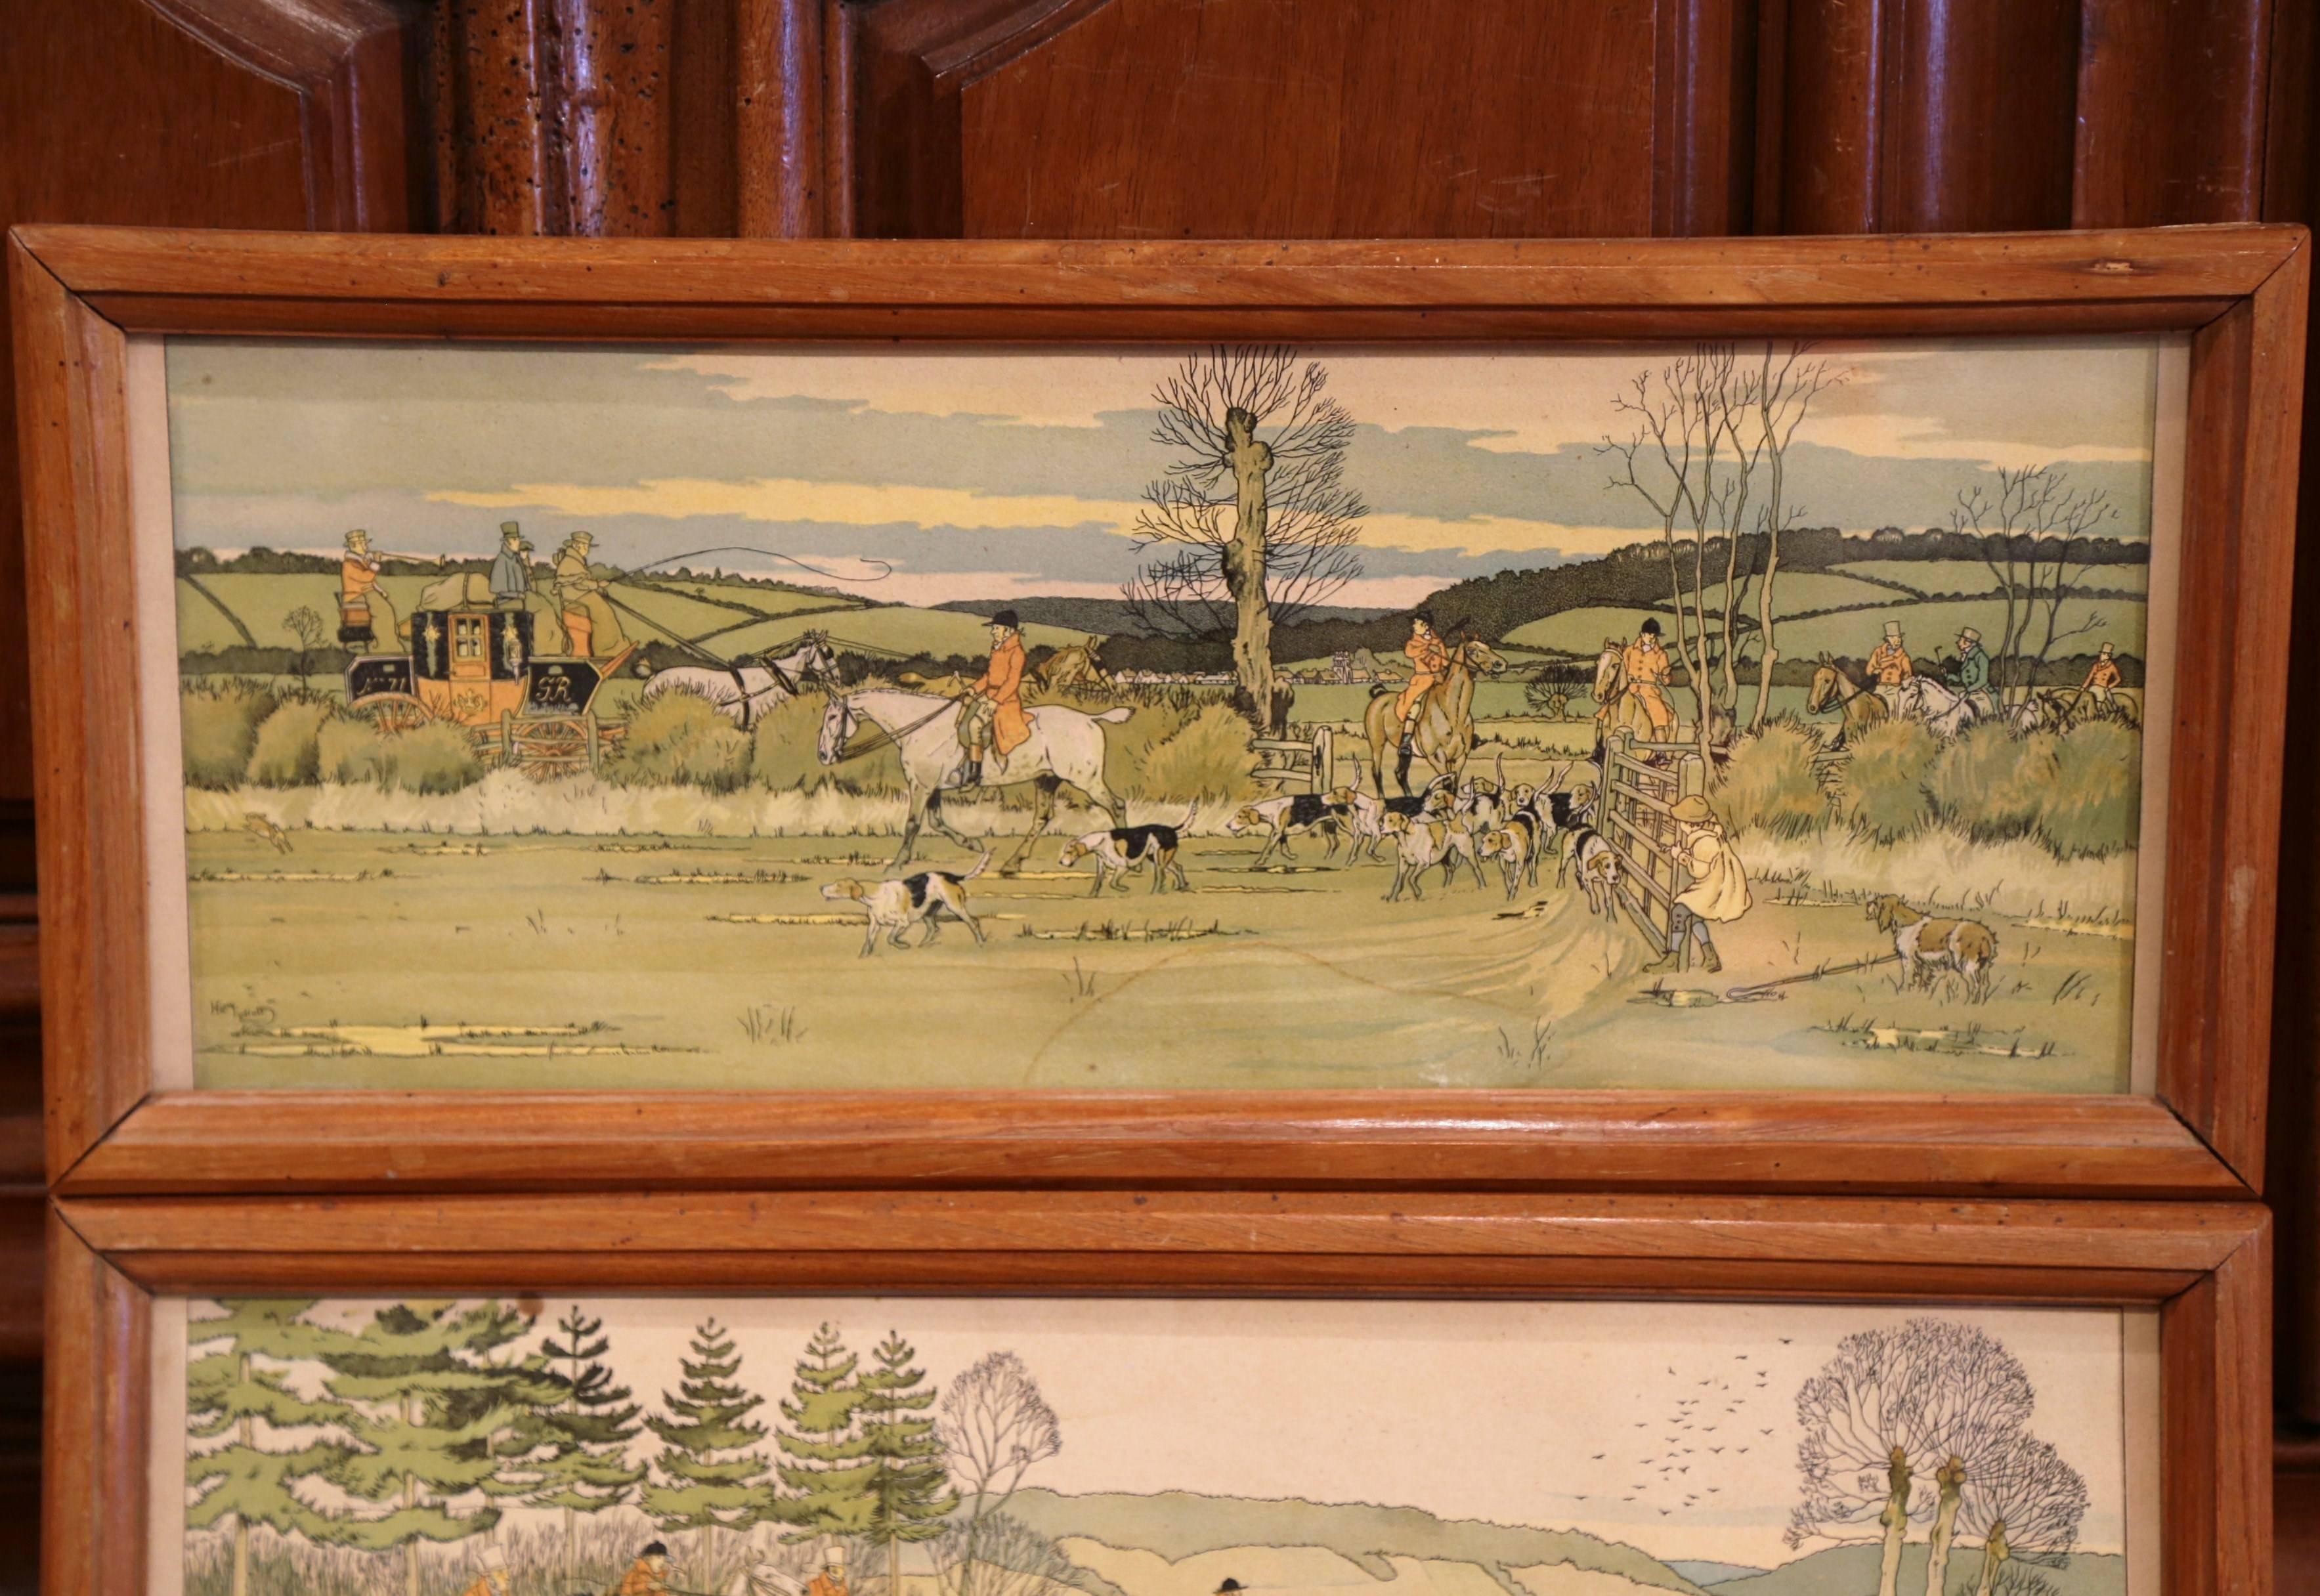 These elegant antique wall hanging hunt scenes were painted in England, circa 1870. Each horizontal, framed painting features a hunt scene with hunters on horses and surrounded by a herd of dogs. Both illustrated artworks, signed Harry Eliott, are